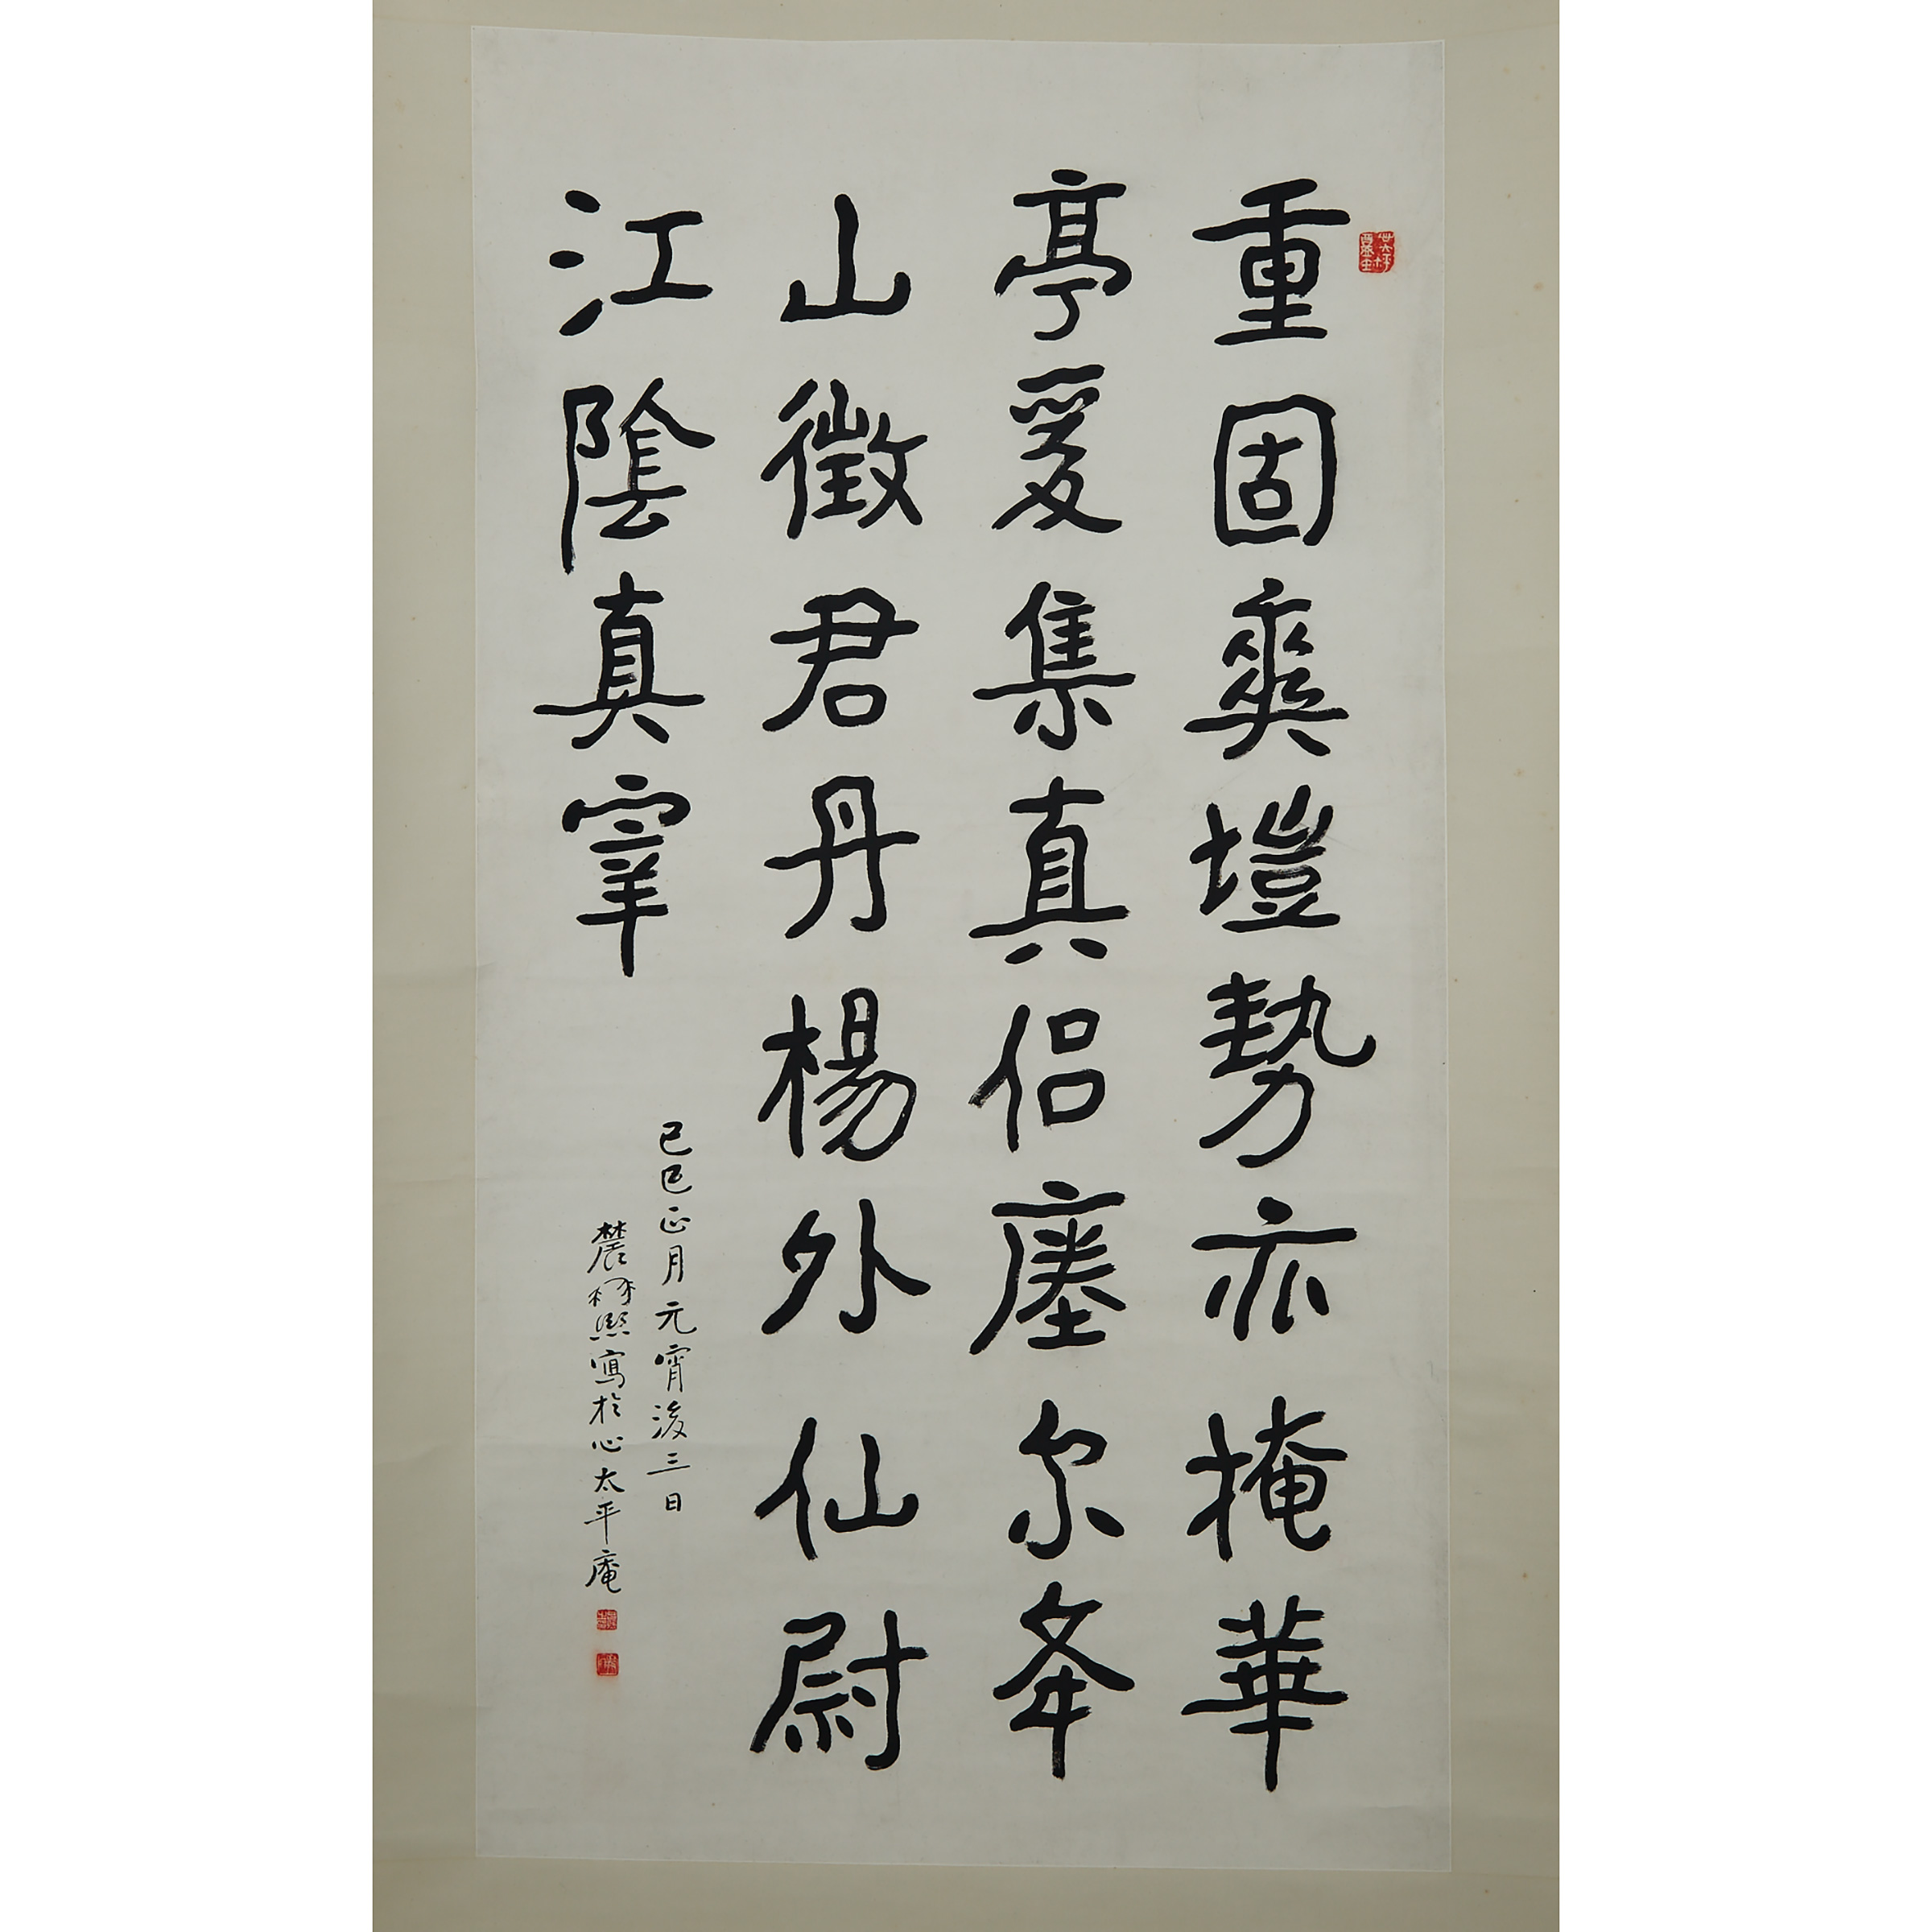 Attributed to Zeng Xi (1861-1930) Calligraphy 